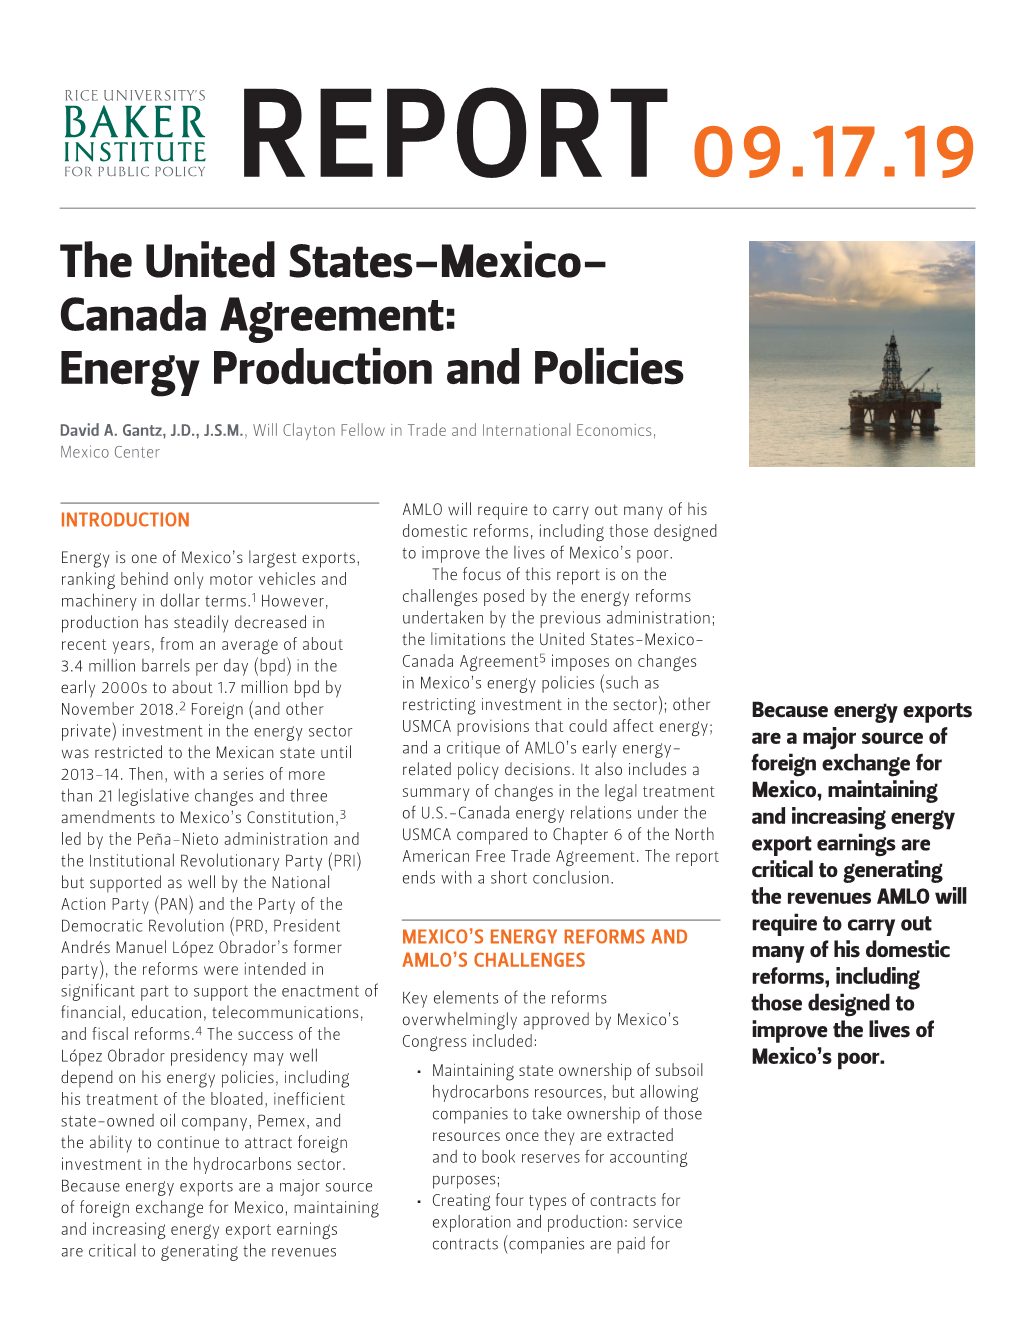 The United States-Mexico-Canada Agreement: Energy Production and Policies